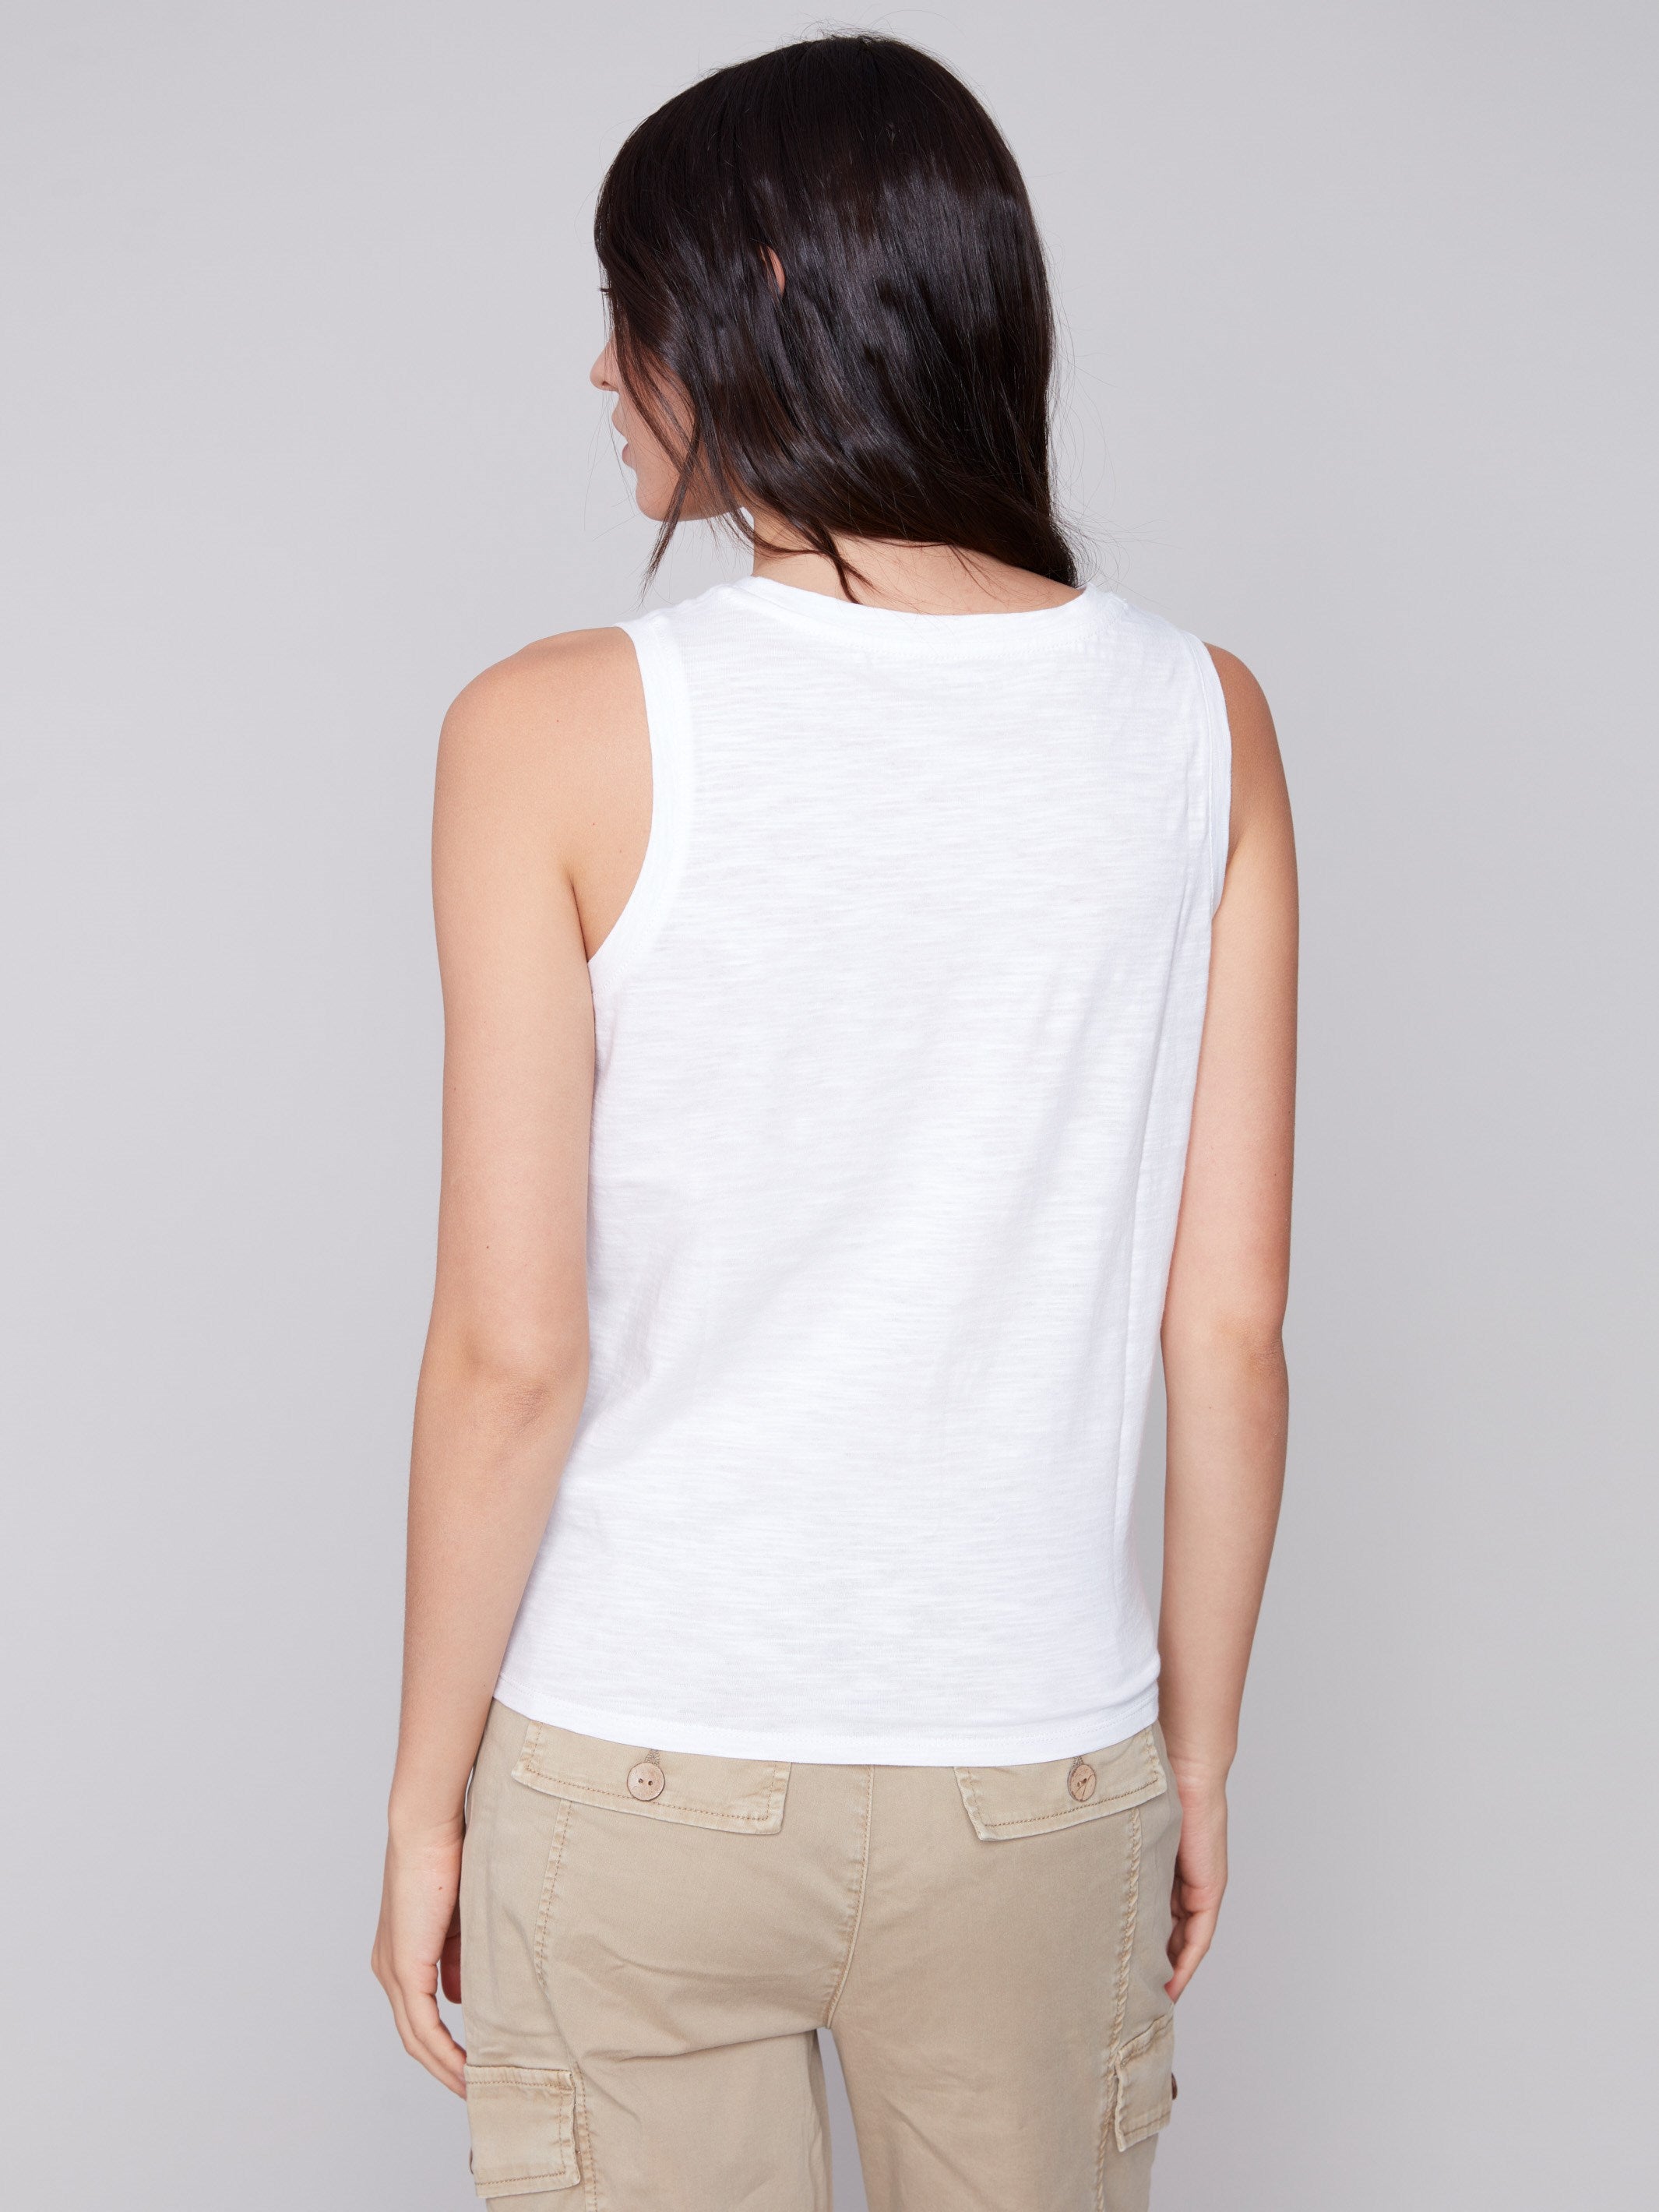 Charlie B Organic Cotton Tank Top With Knot Detail - White - Image 2